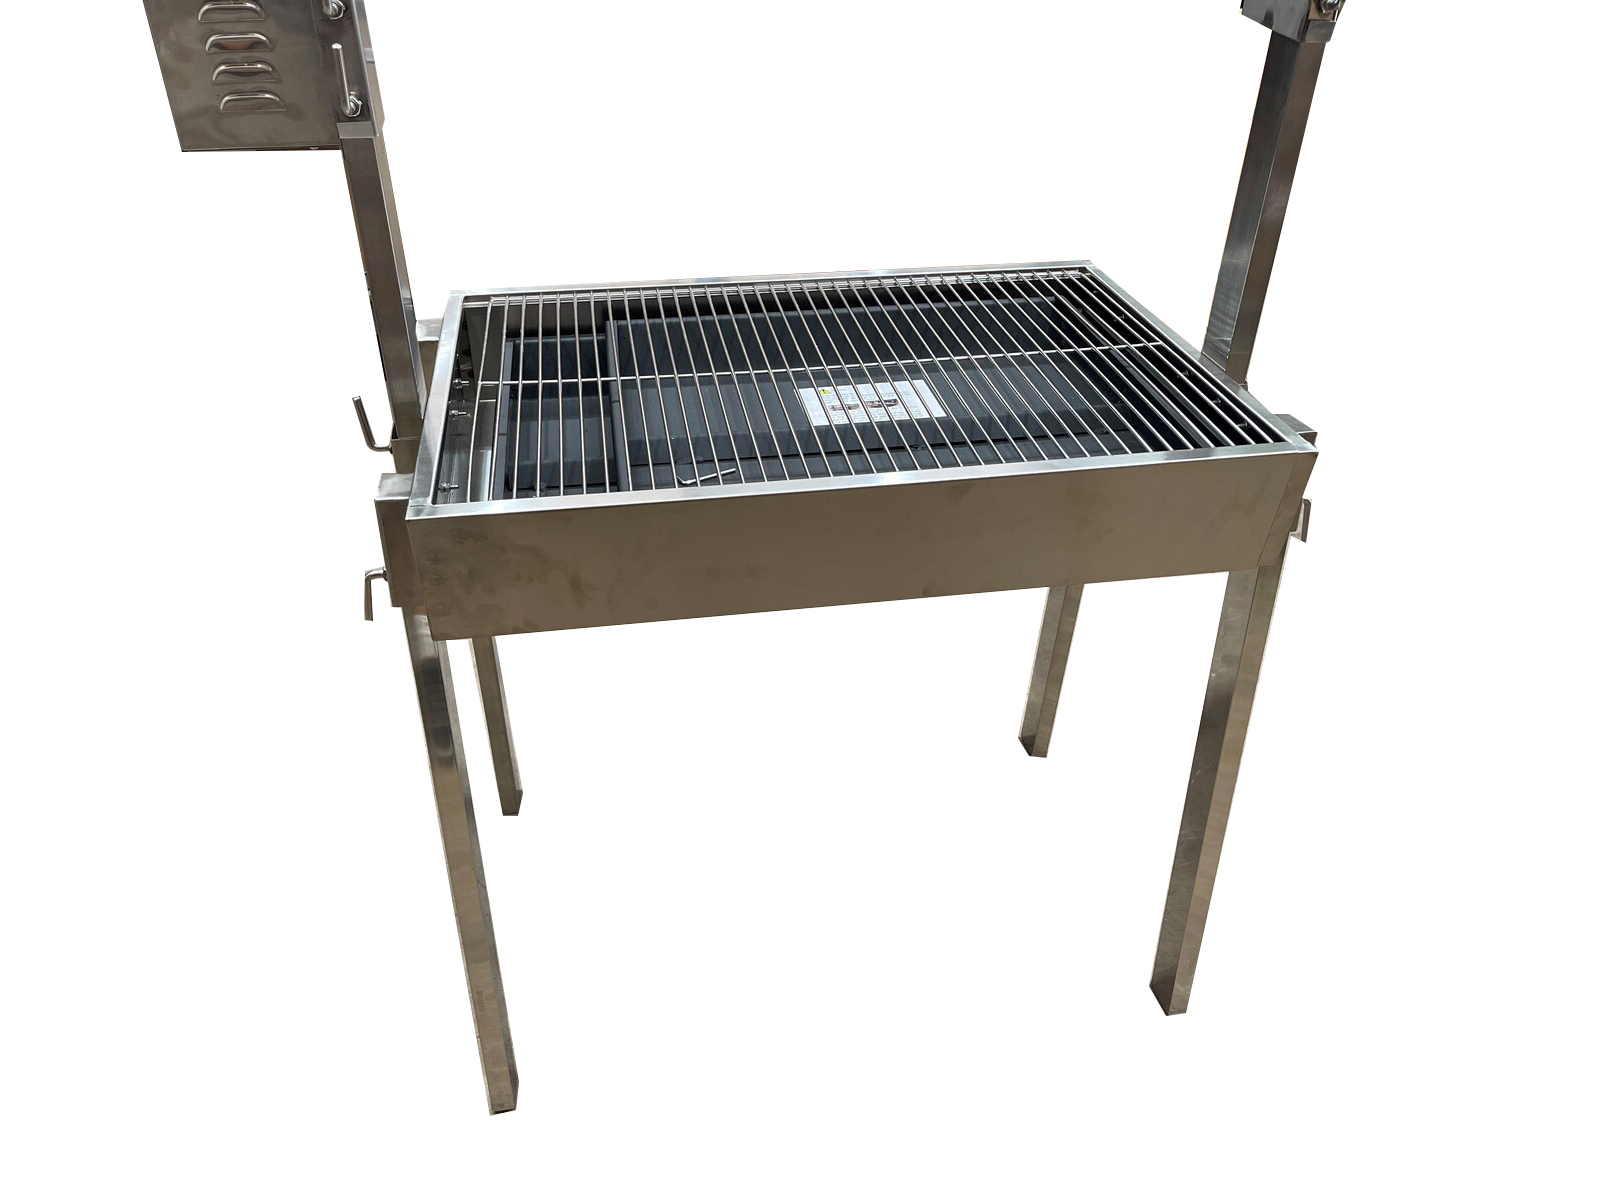 Extendable Charcoal Spit Roast Machine  - 25kgs meat capacity Motor from DIZZY LAMB - SSB-3060X